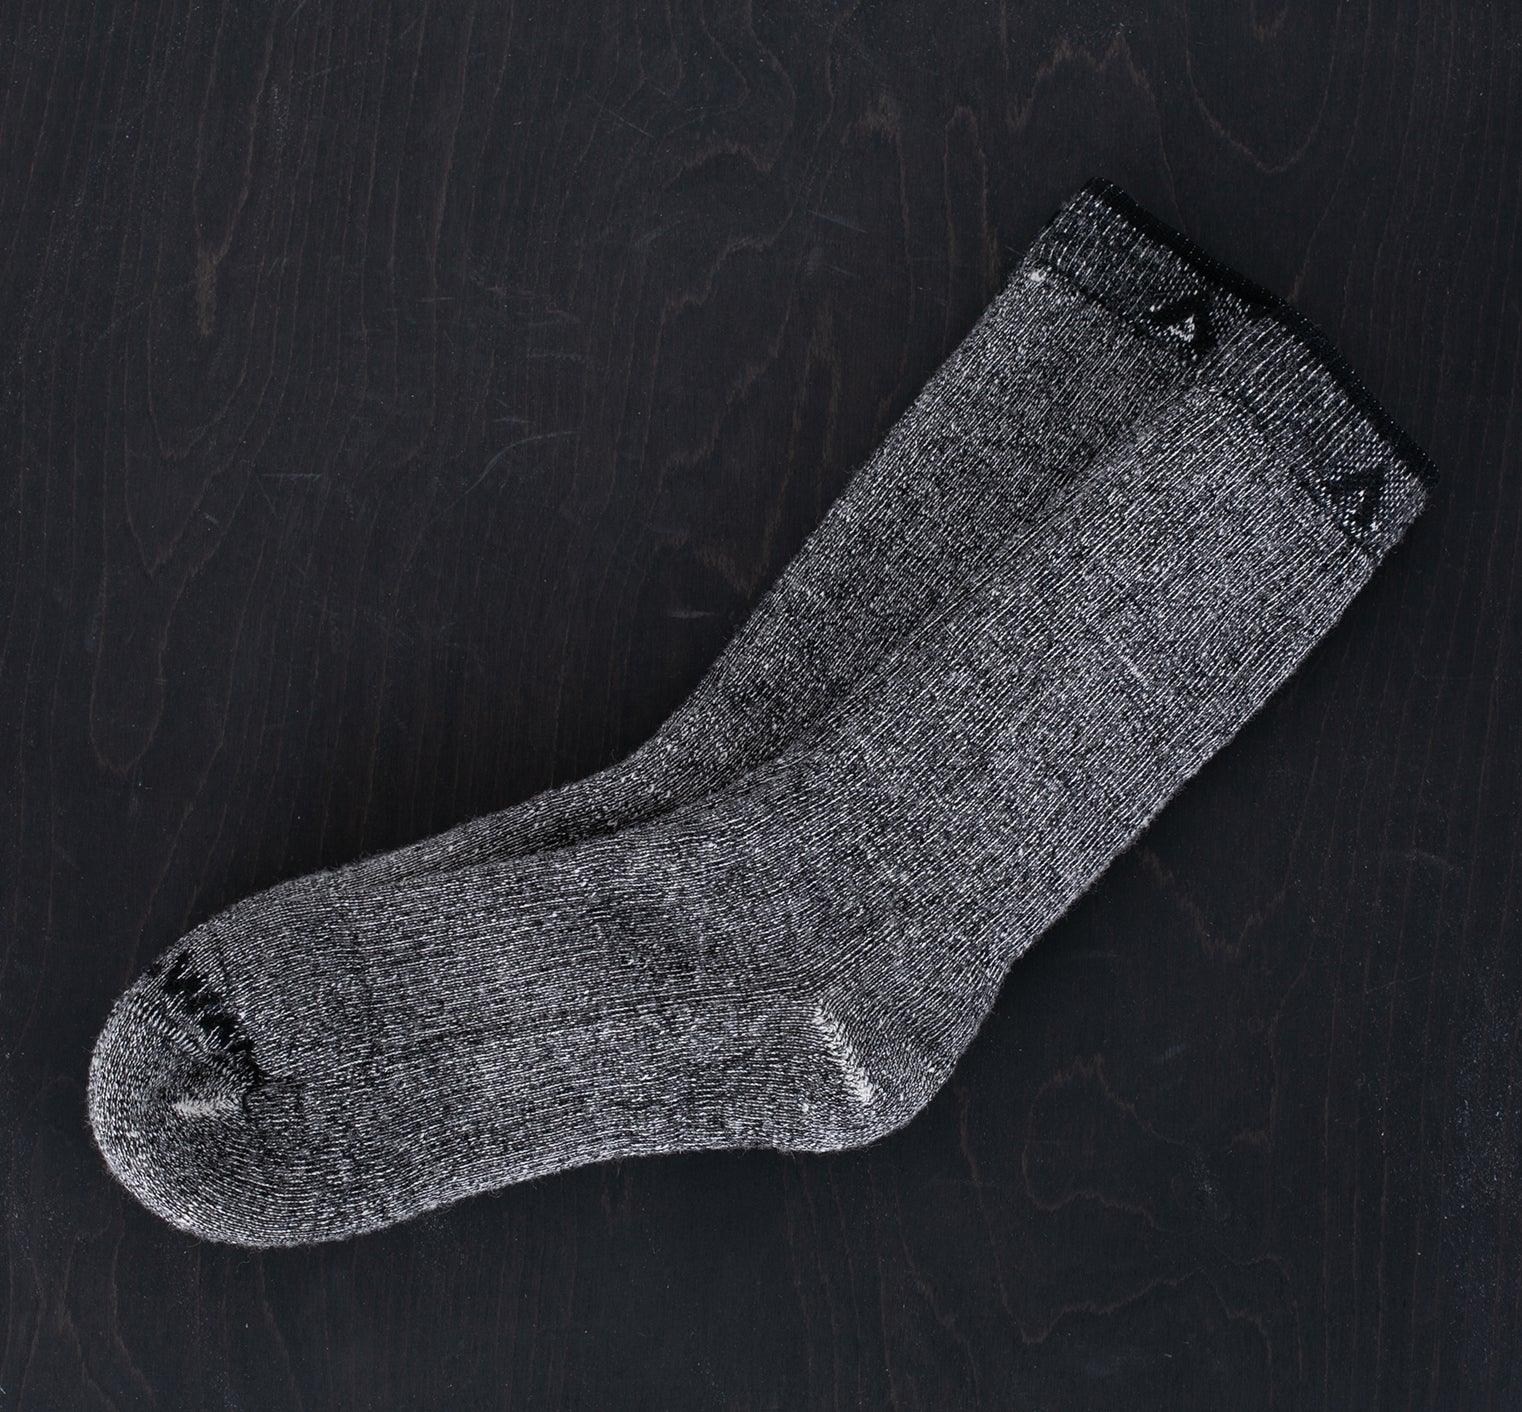 Image showing the WI-F2322-BLK - Merino Comfort Hiker 2-Pack - Black II which is a Socks described by the following info Footwear, IHSALE_M23, Socks, Wigwam and sold on the IRON HEART GERMANY online store